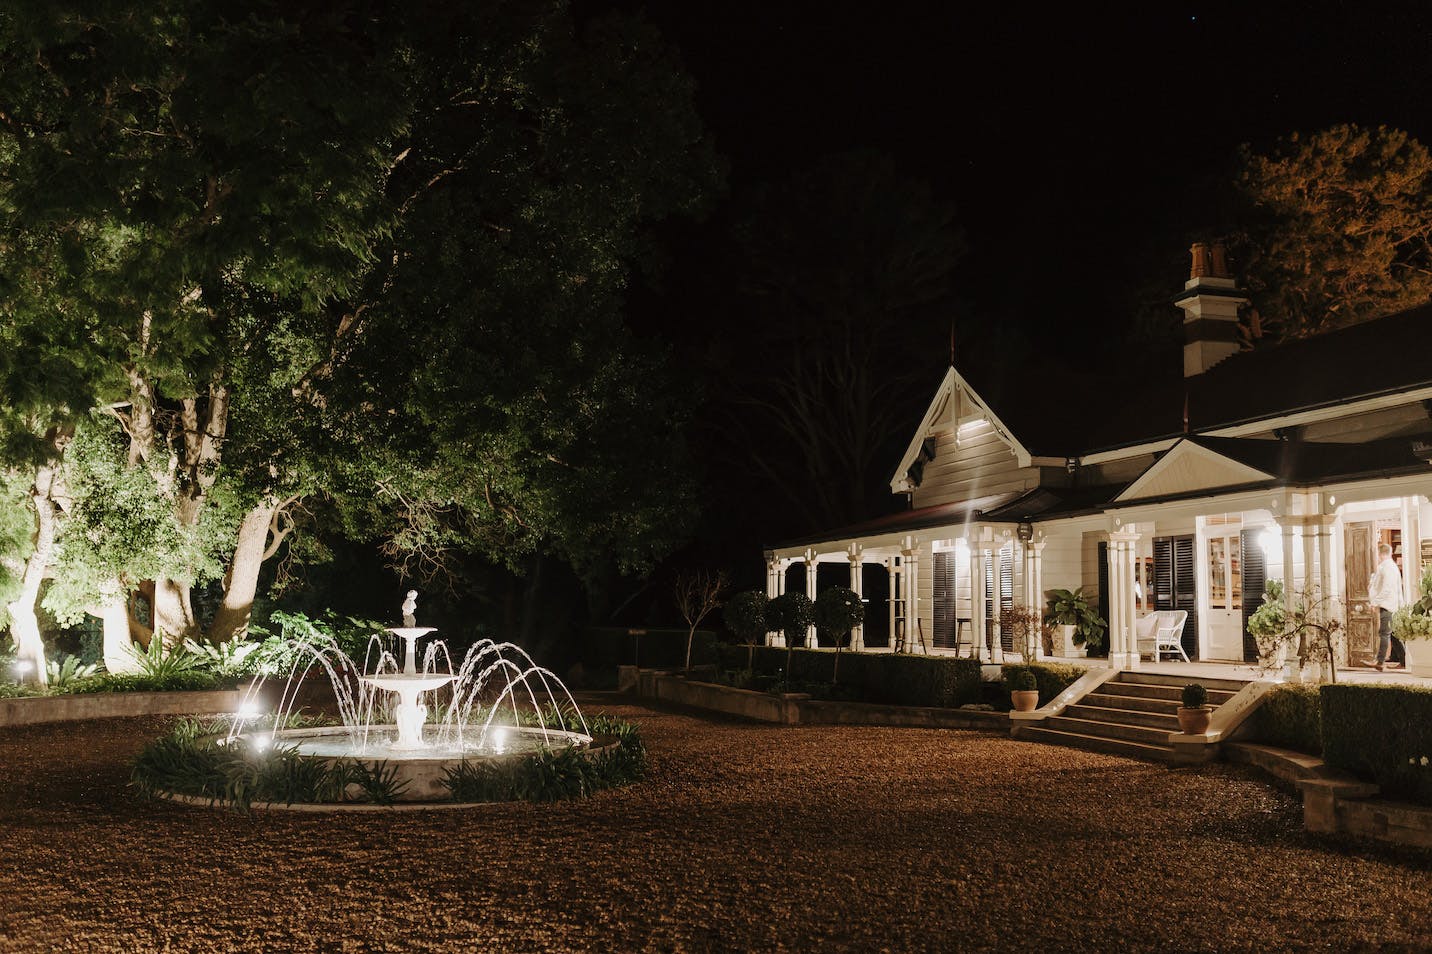 A nighttime scene of a well-lit, large house with a wraparound porch and multiple windows. In the yard, there is a decorative lit-up fountain surrounded by gravel pathways. Tall trees frame the left side, casting shadows on the building and surroundings.